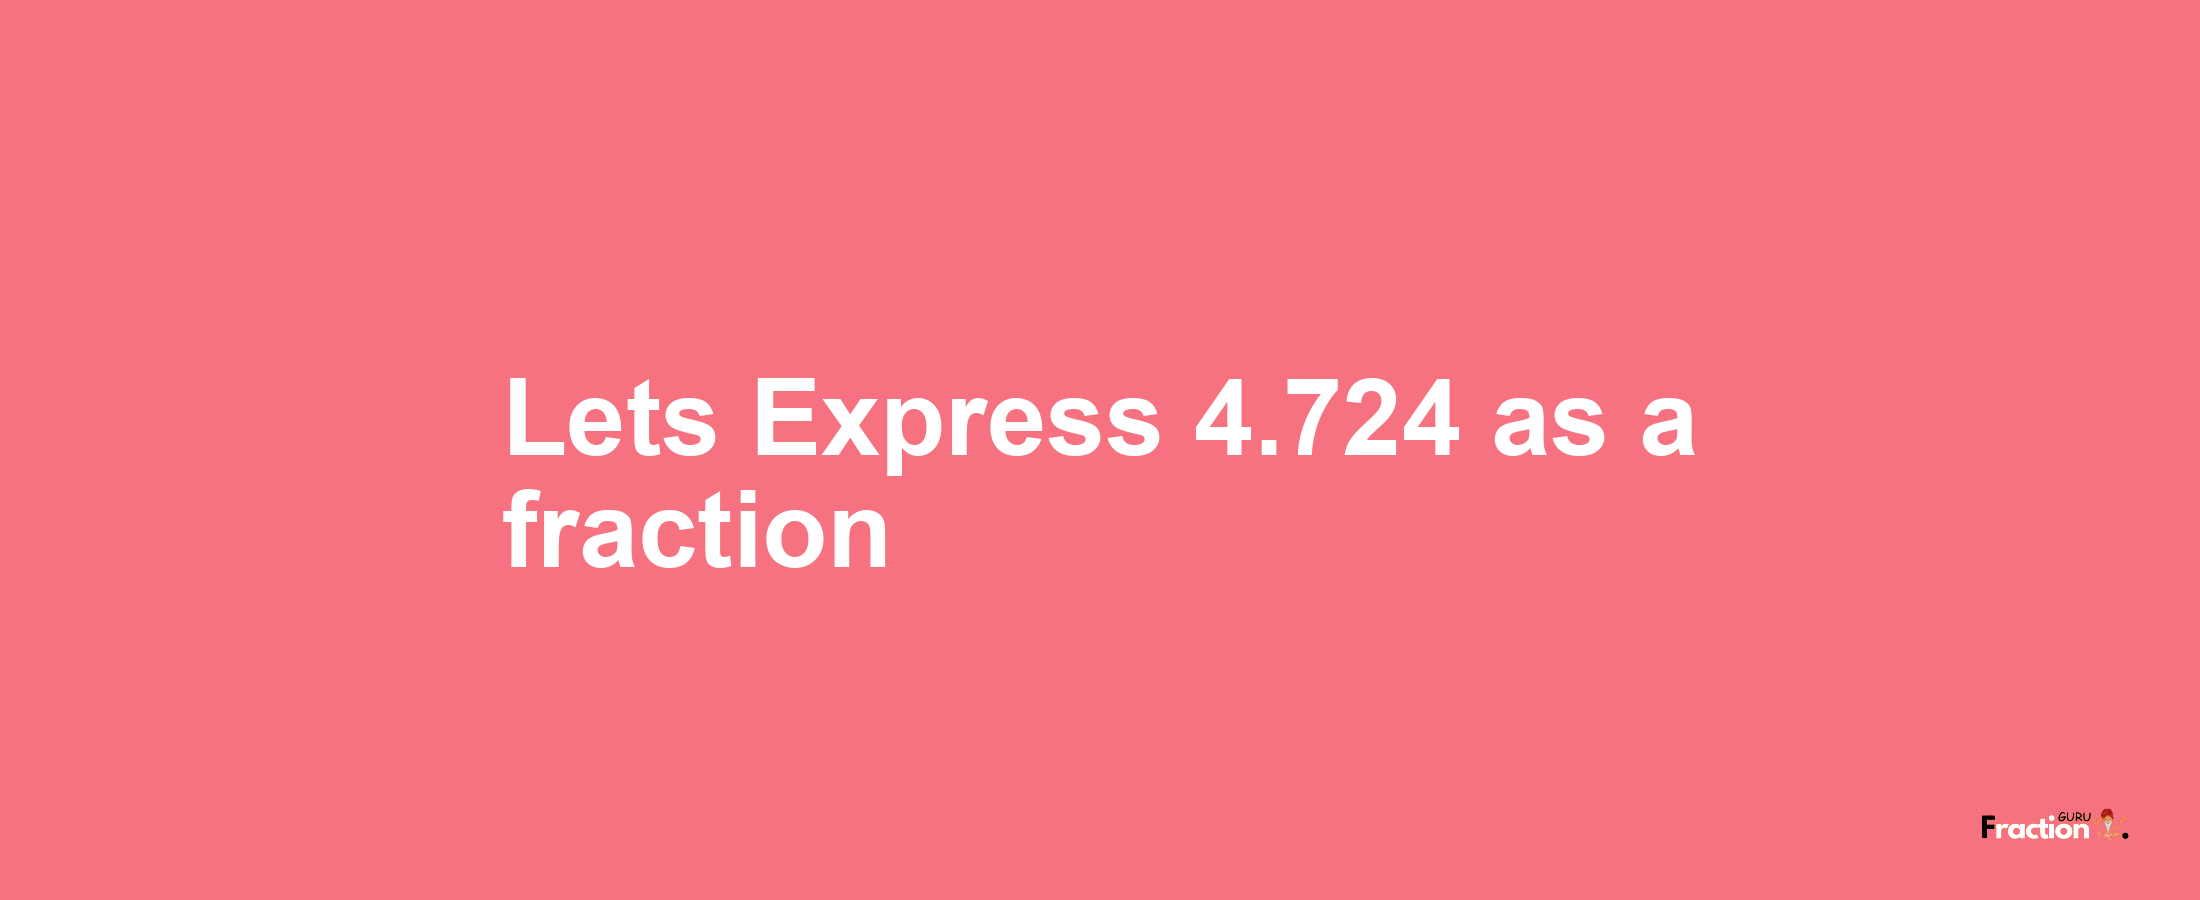 Lets Express 4.724 as afraction